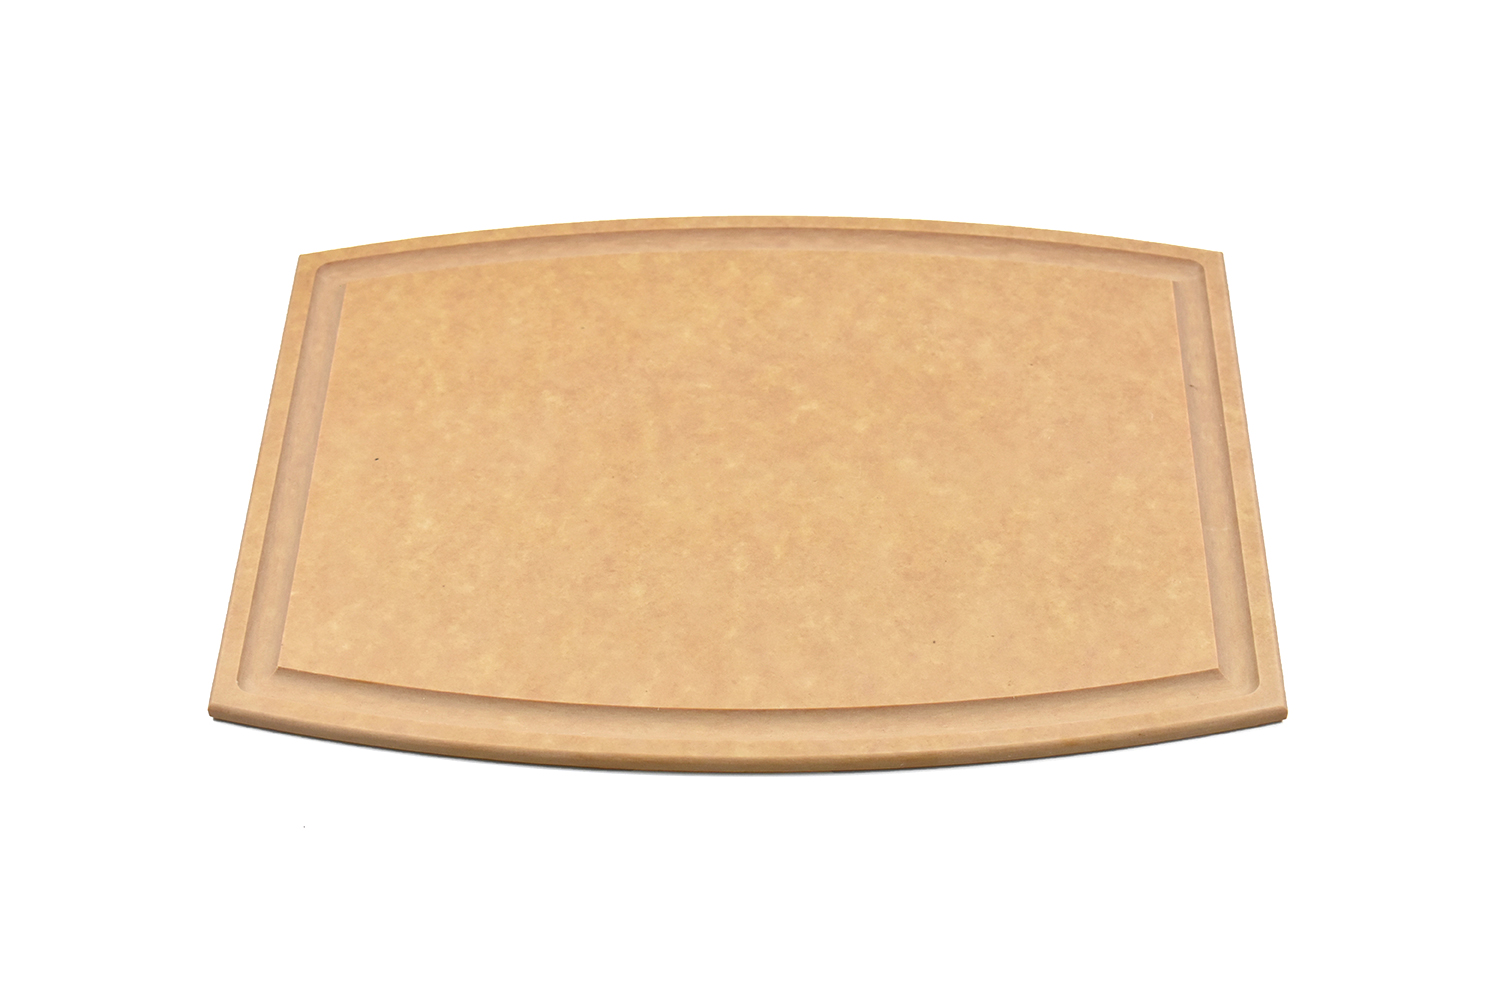 Arched cutting board with juice groove (Dishwasher safe)